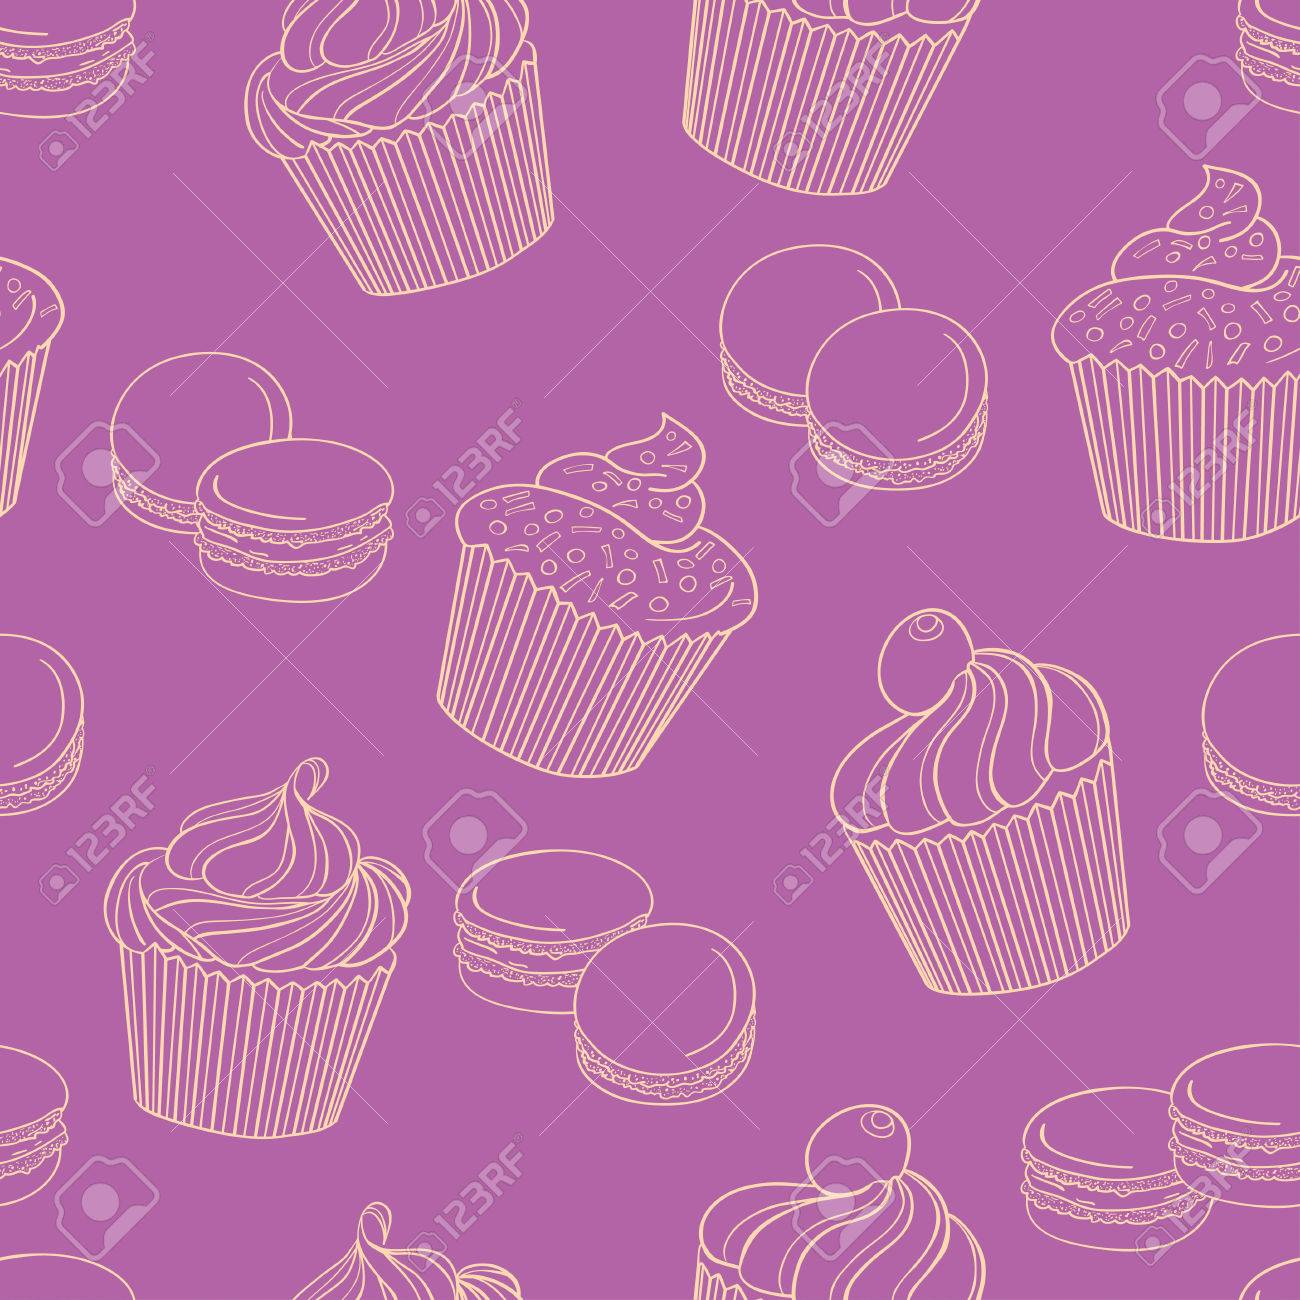 Delicious Cupcakes With Macaroons On Purple Background Seamless